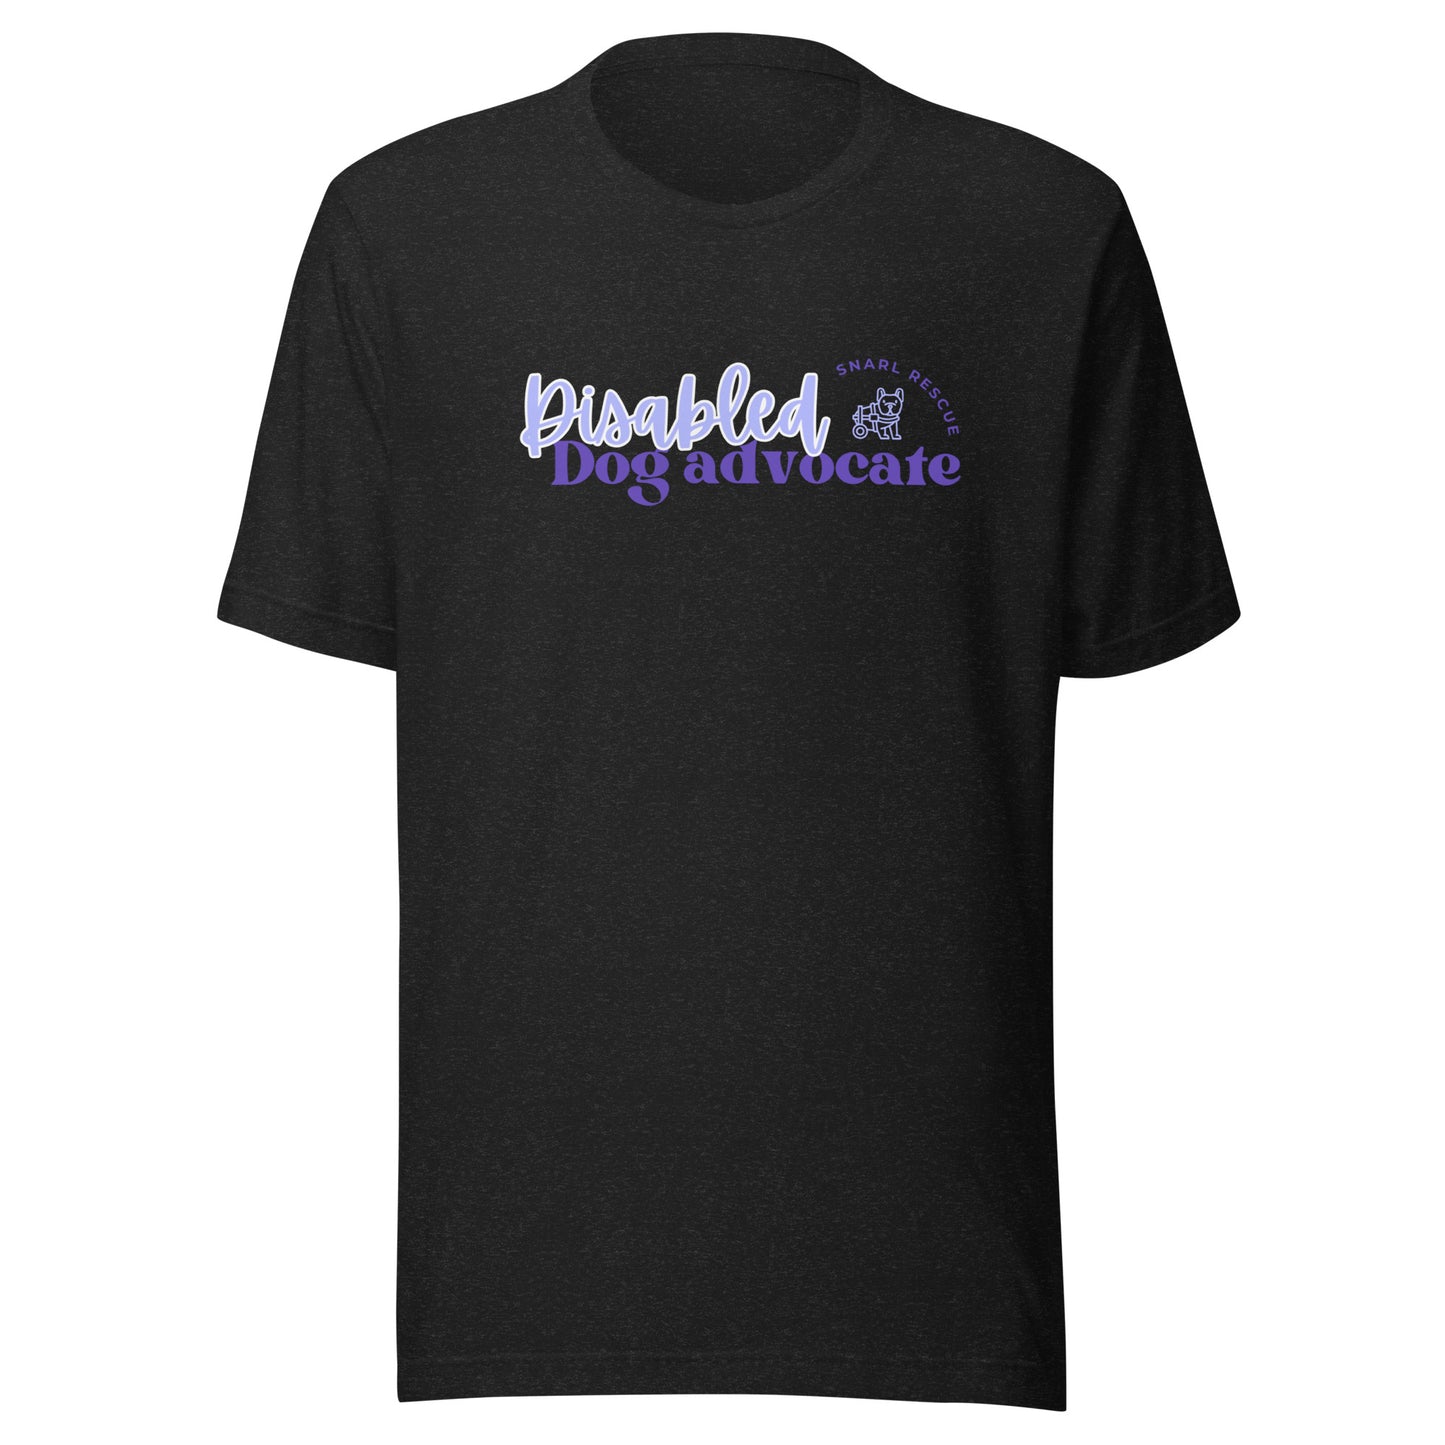 The Disabled Dog Advocate Tshirt